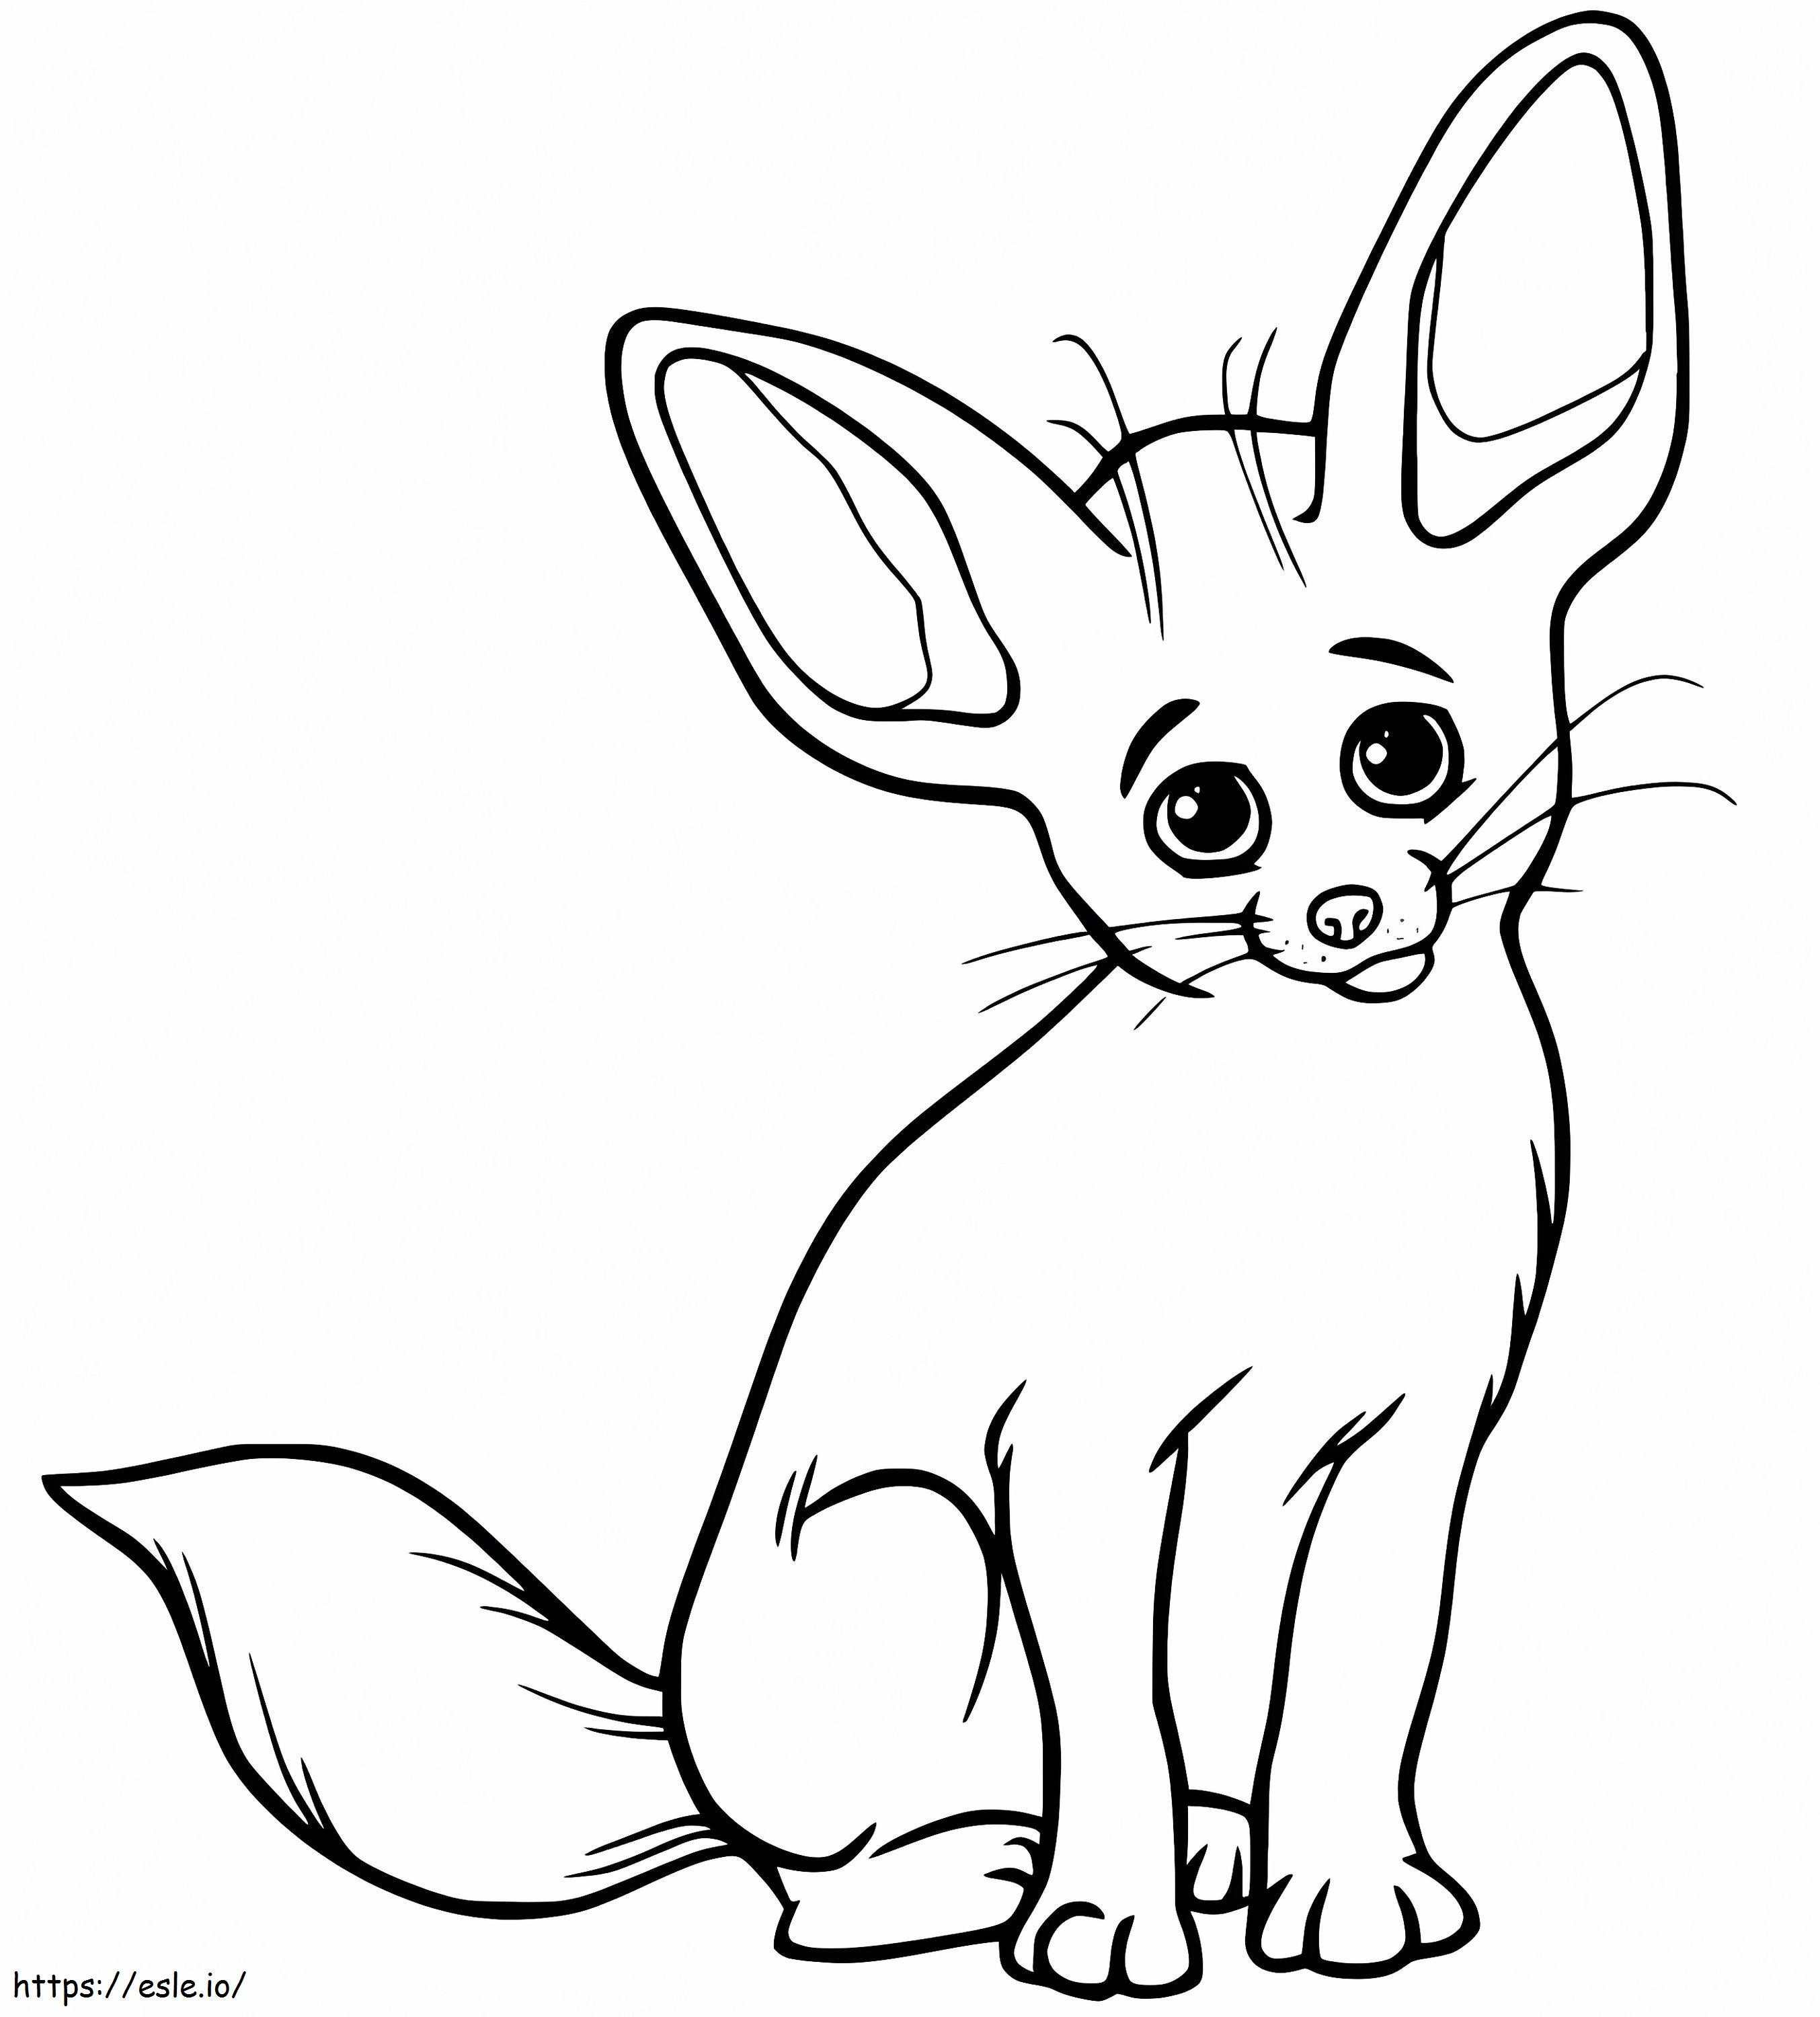 Lovely Fennec Fox coloring page